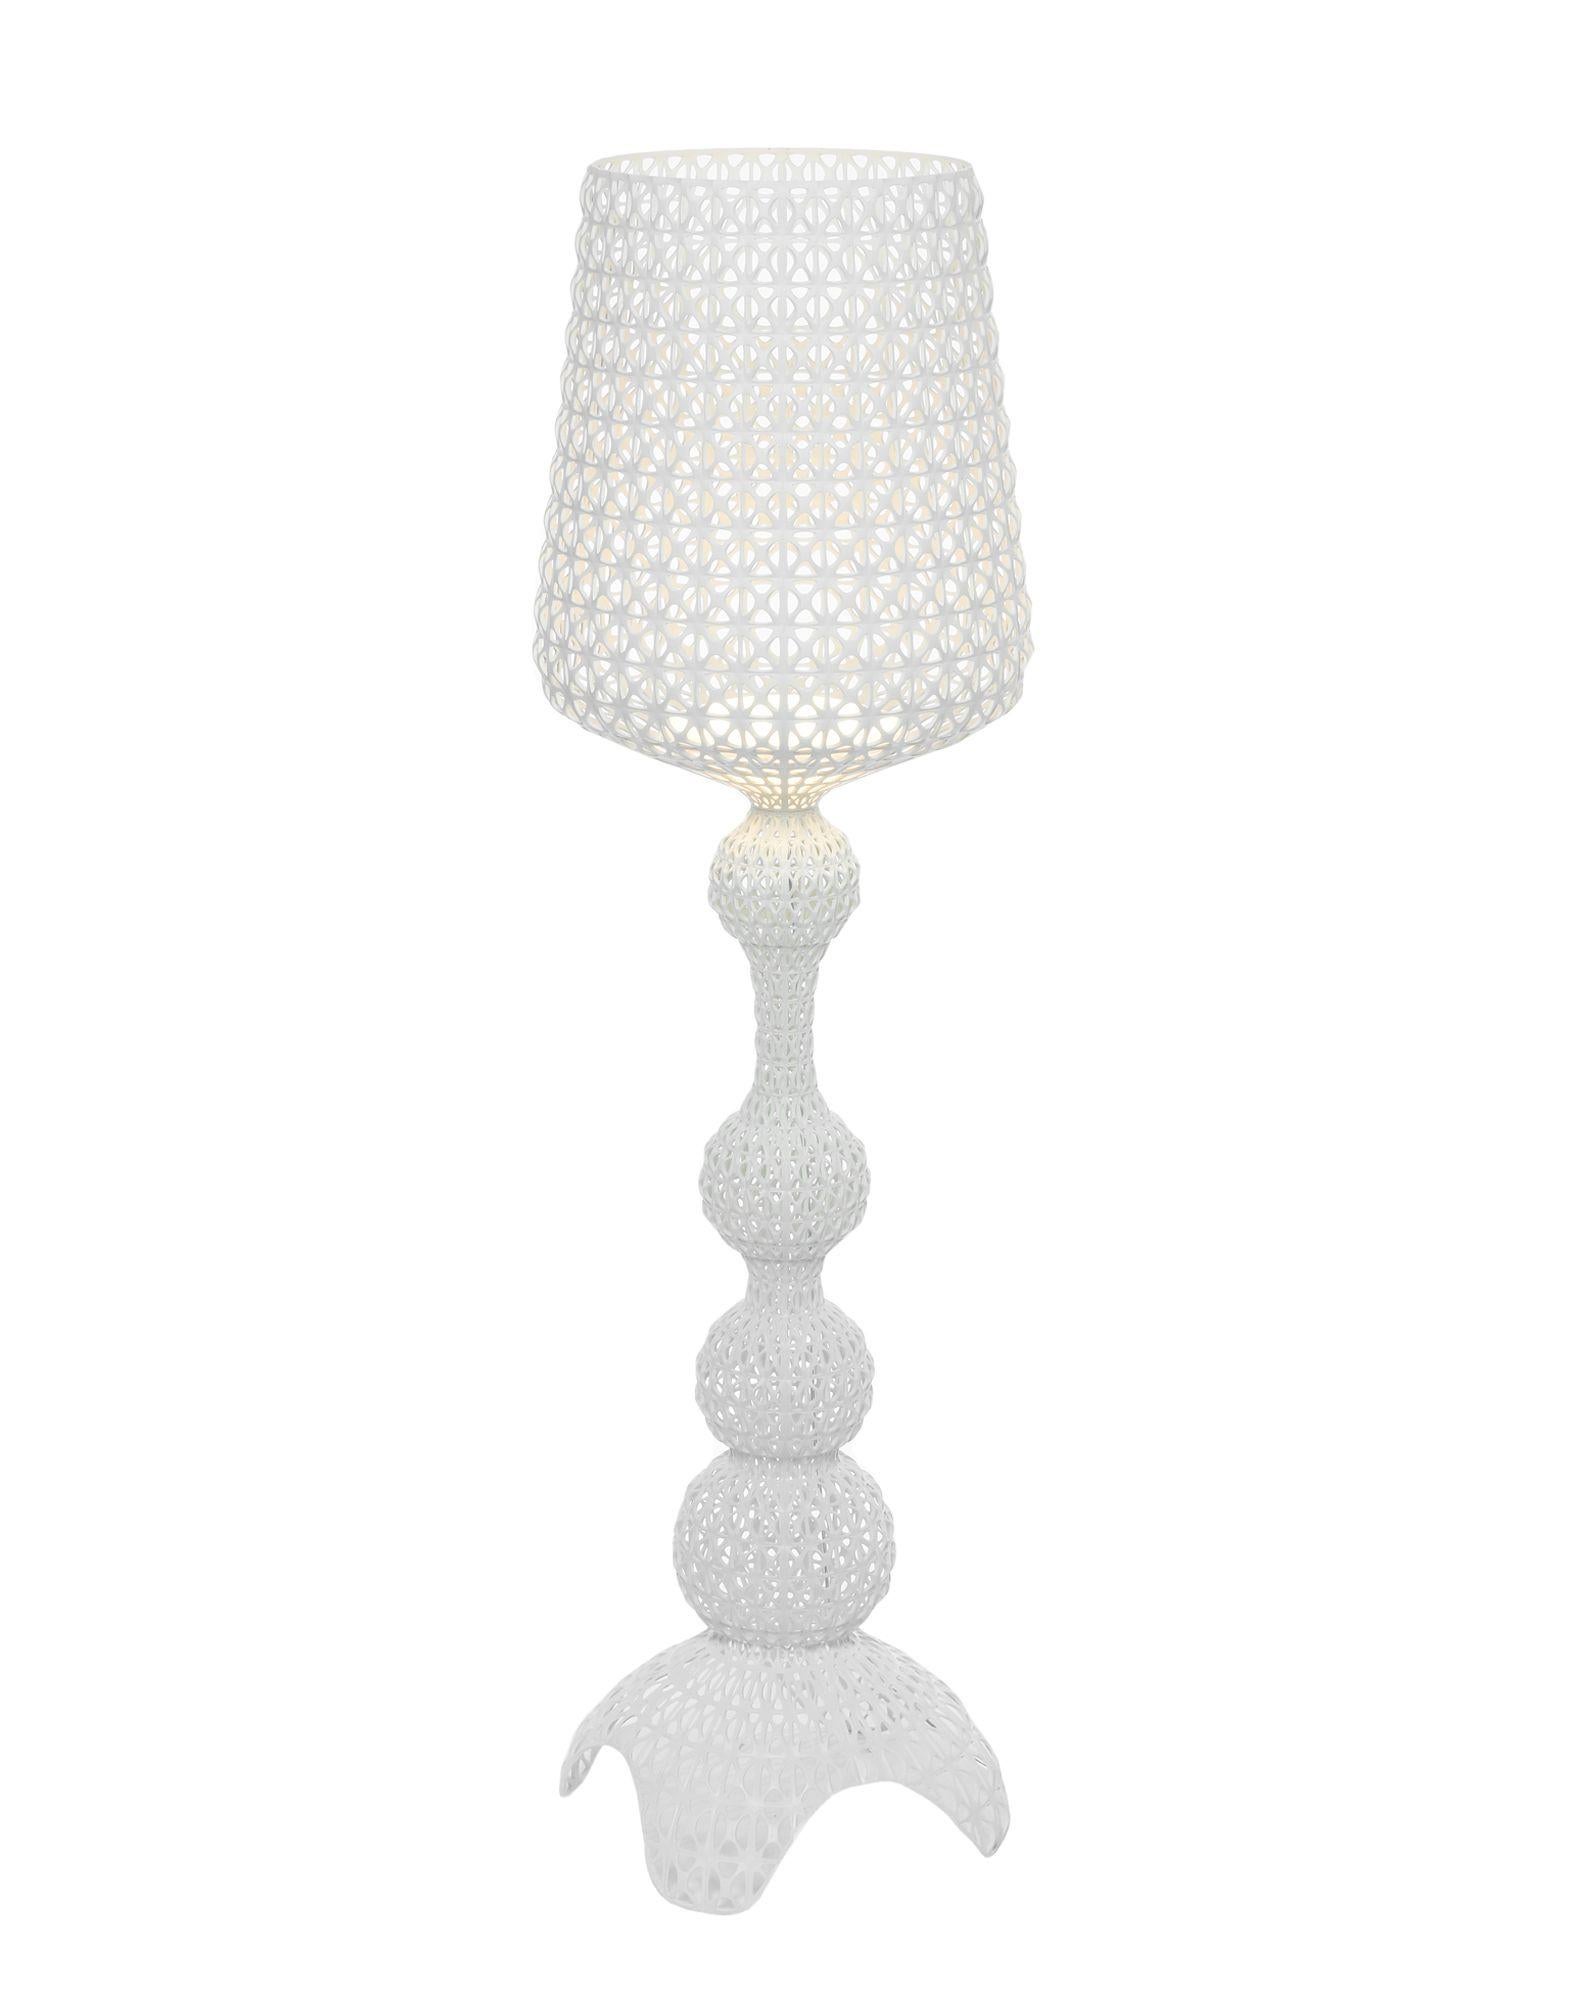 The Kabuki floor lamp is injection molded. The sophisticated injection technology used makes it possible to crate a woven structure similar to lace with a unique perforated surface through which the light is diffused.

Dimensions: Height 65.33